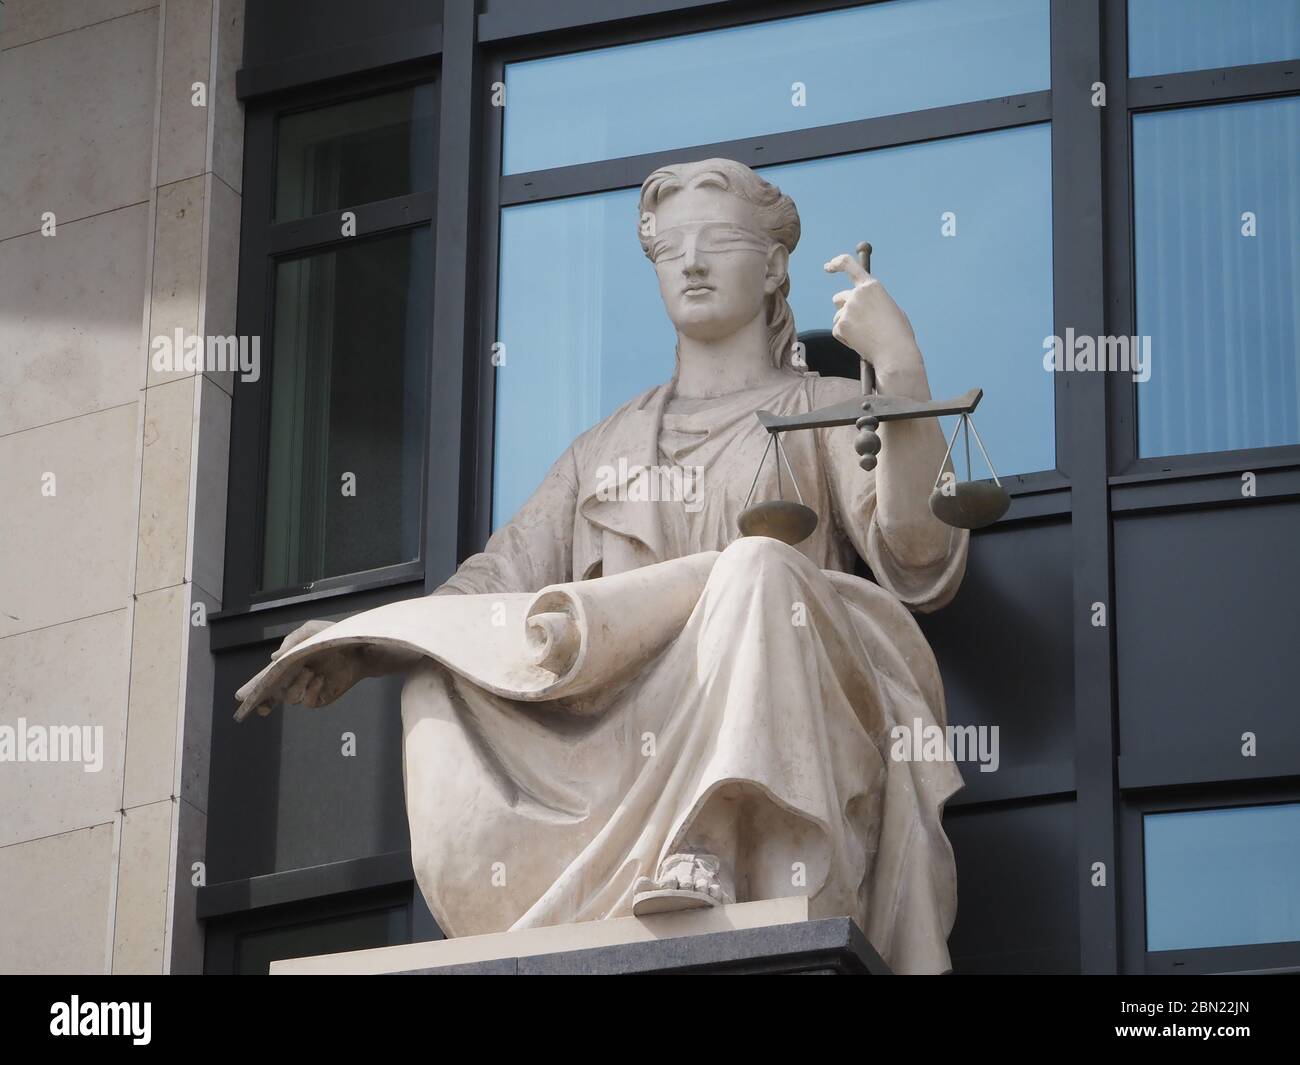 Saint Petersburg, Russia - May 11 2020.  The statue of justice Femida . Sculpture of a woman with closed eyes and scales in her hand. Stock Photo